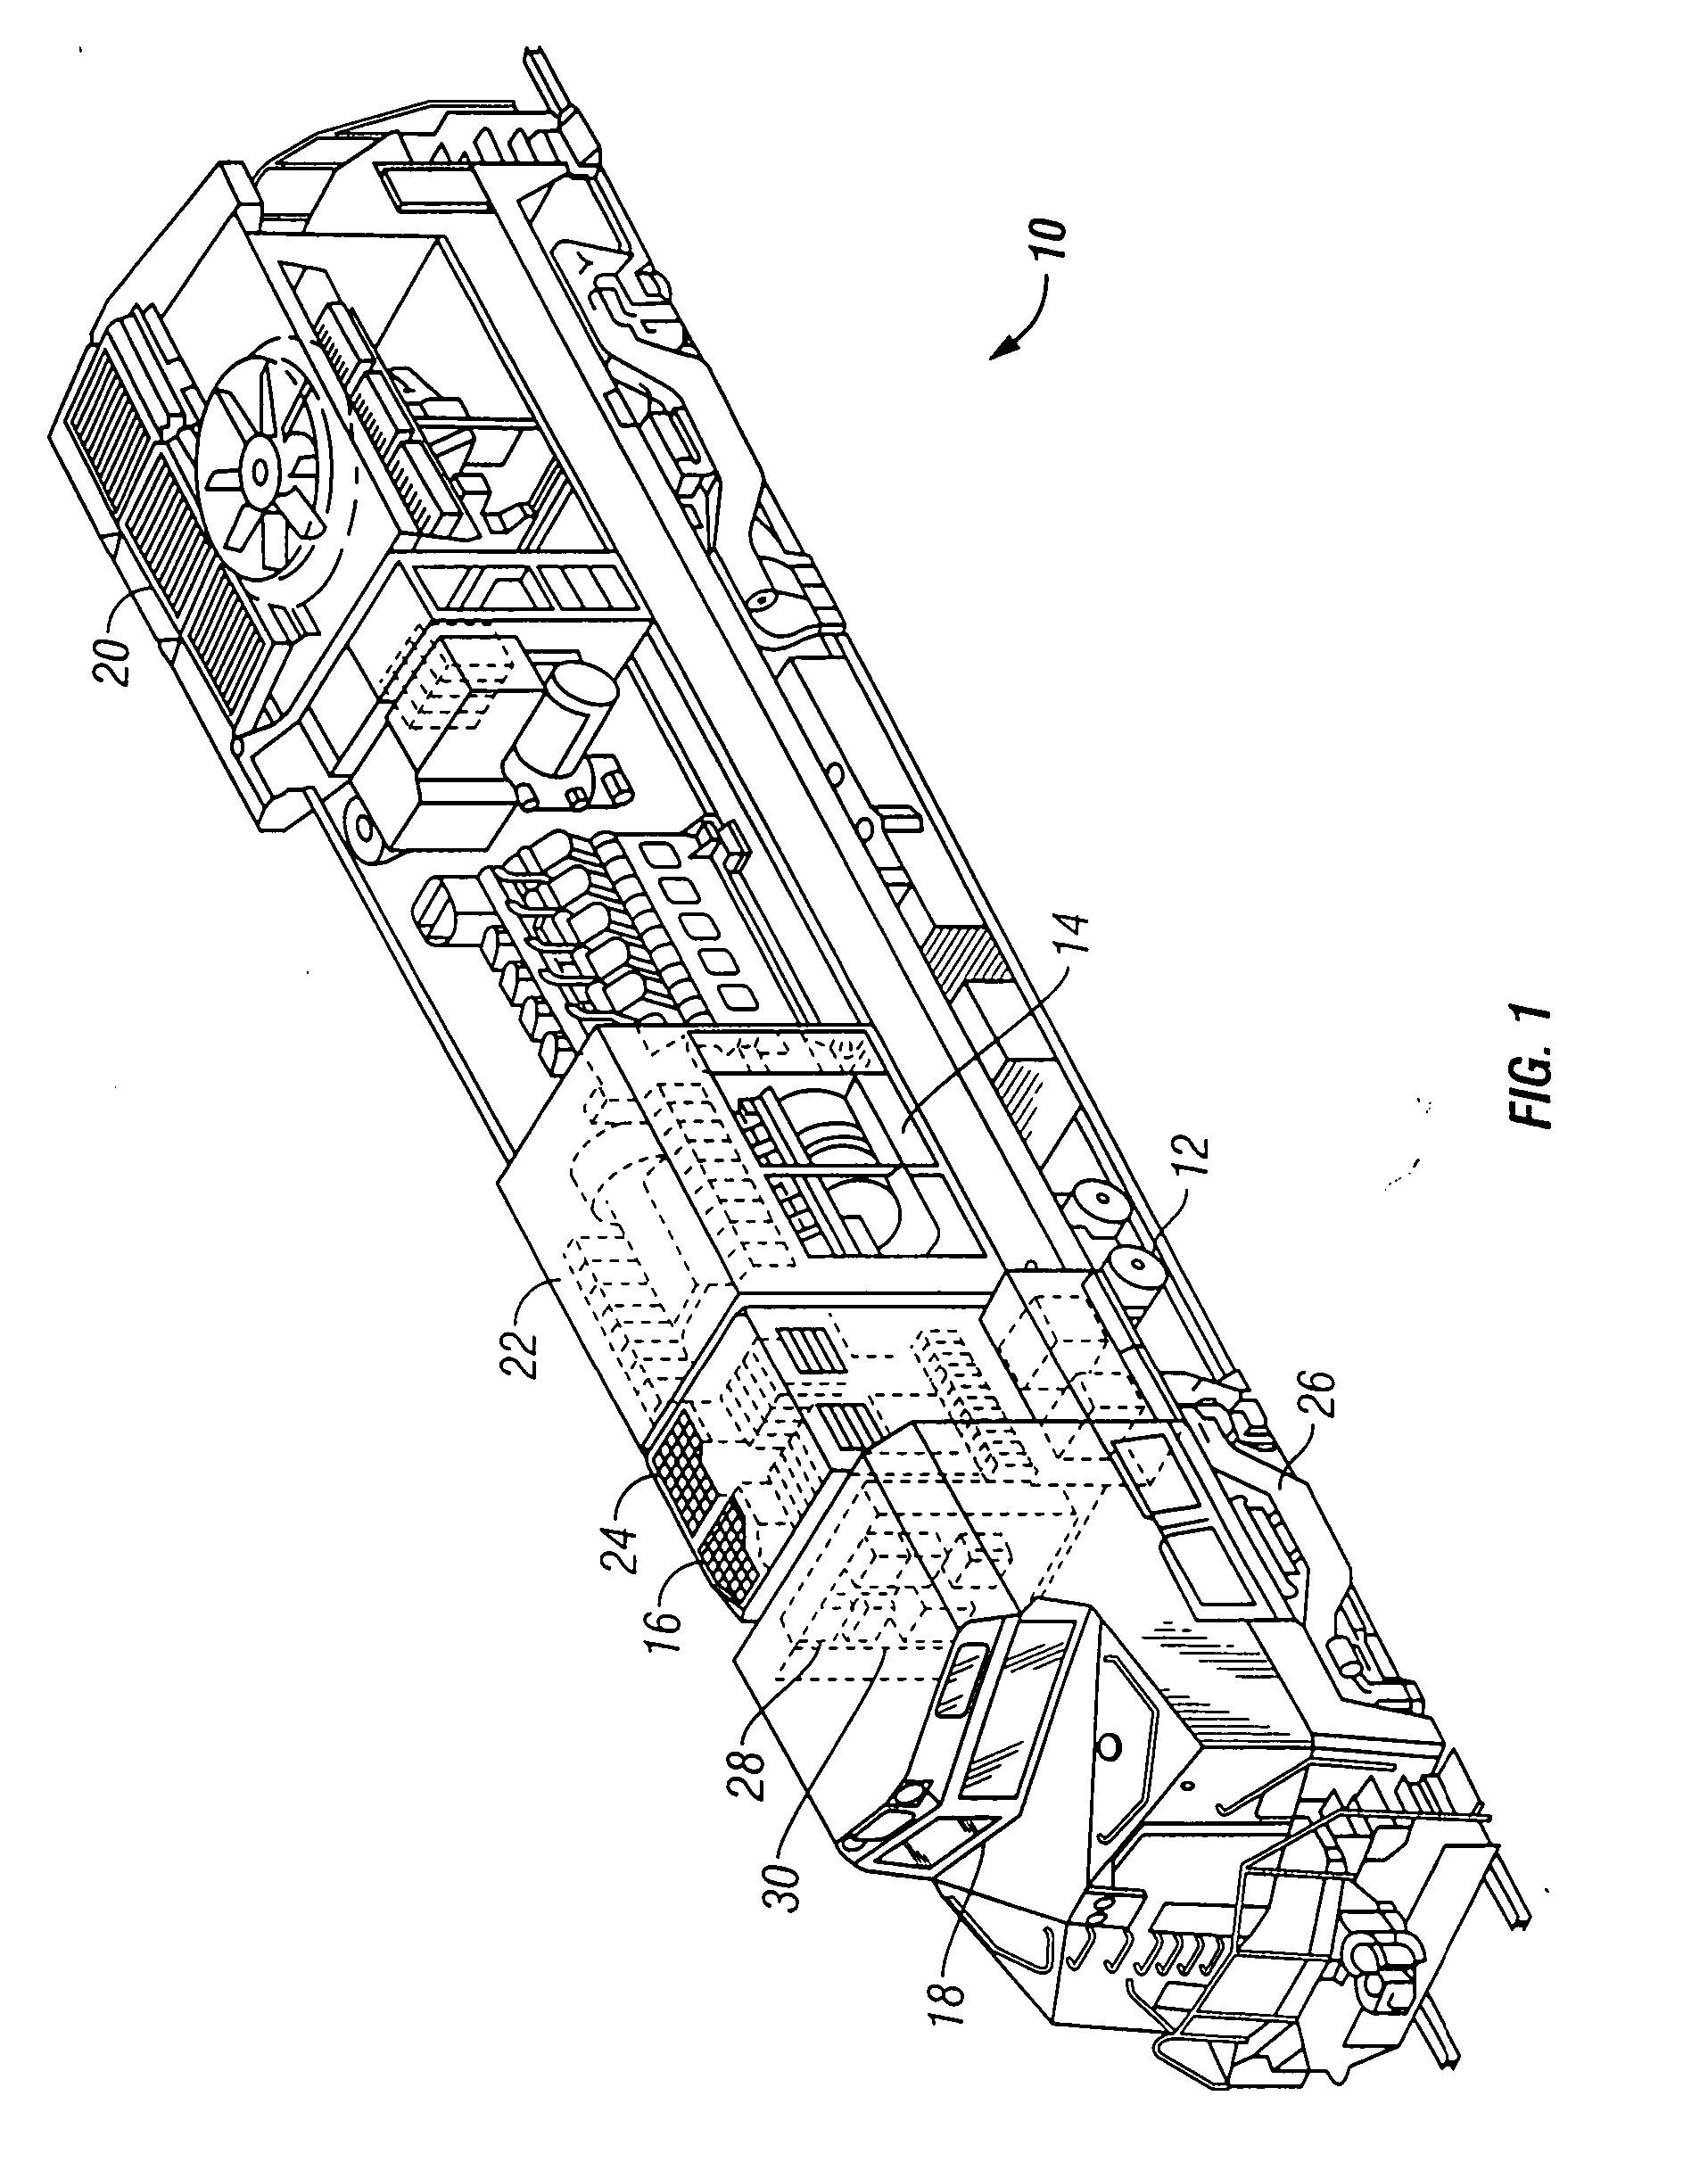 System and method for remote inbound vehicle inspection